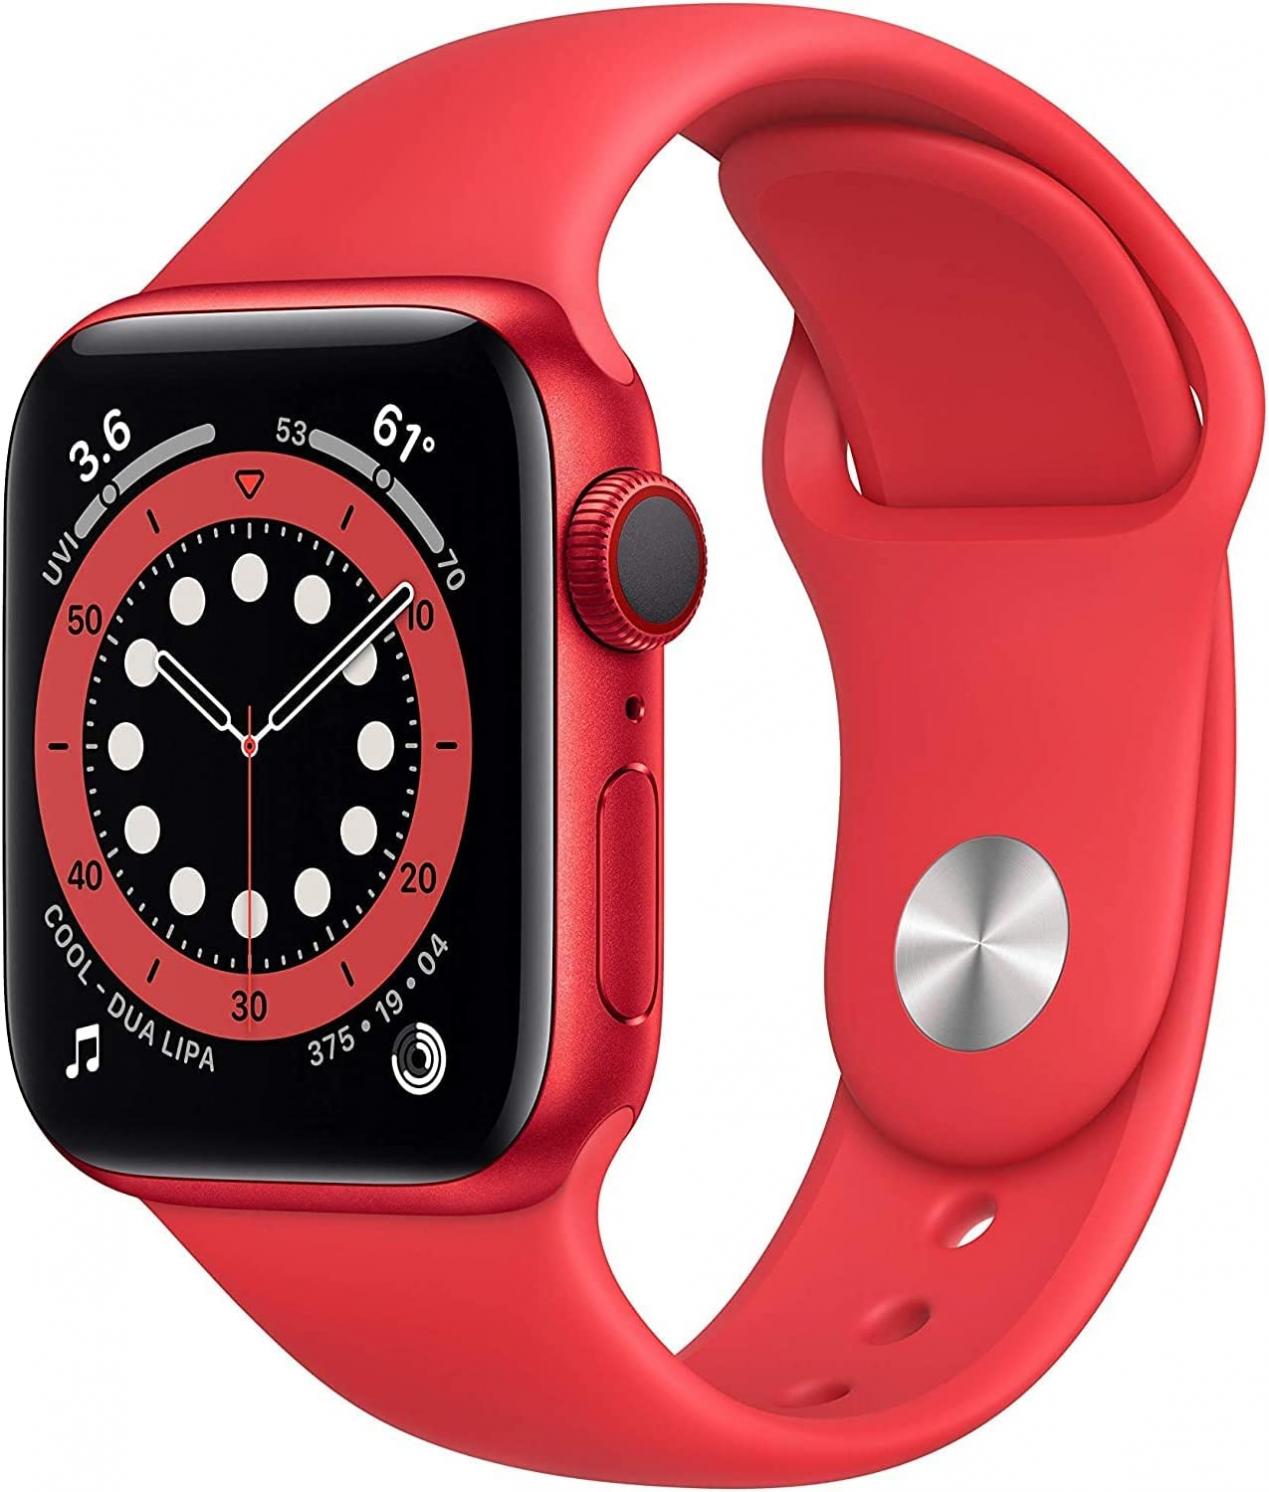 Apple Watch Series 6 (GPS + Cellular, 44mm) - (Product) RED Aluminum Case with RED Sport Band (Renewed)